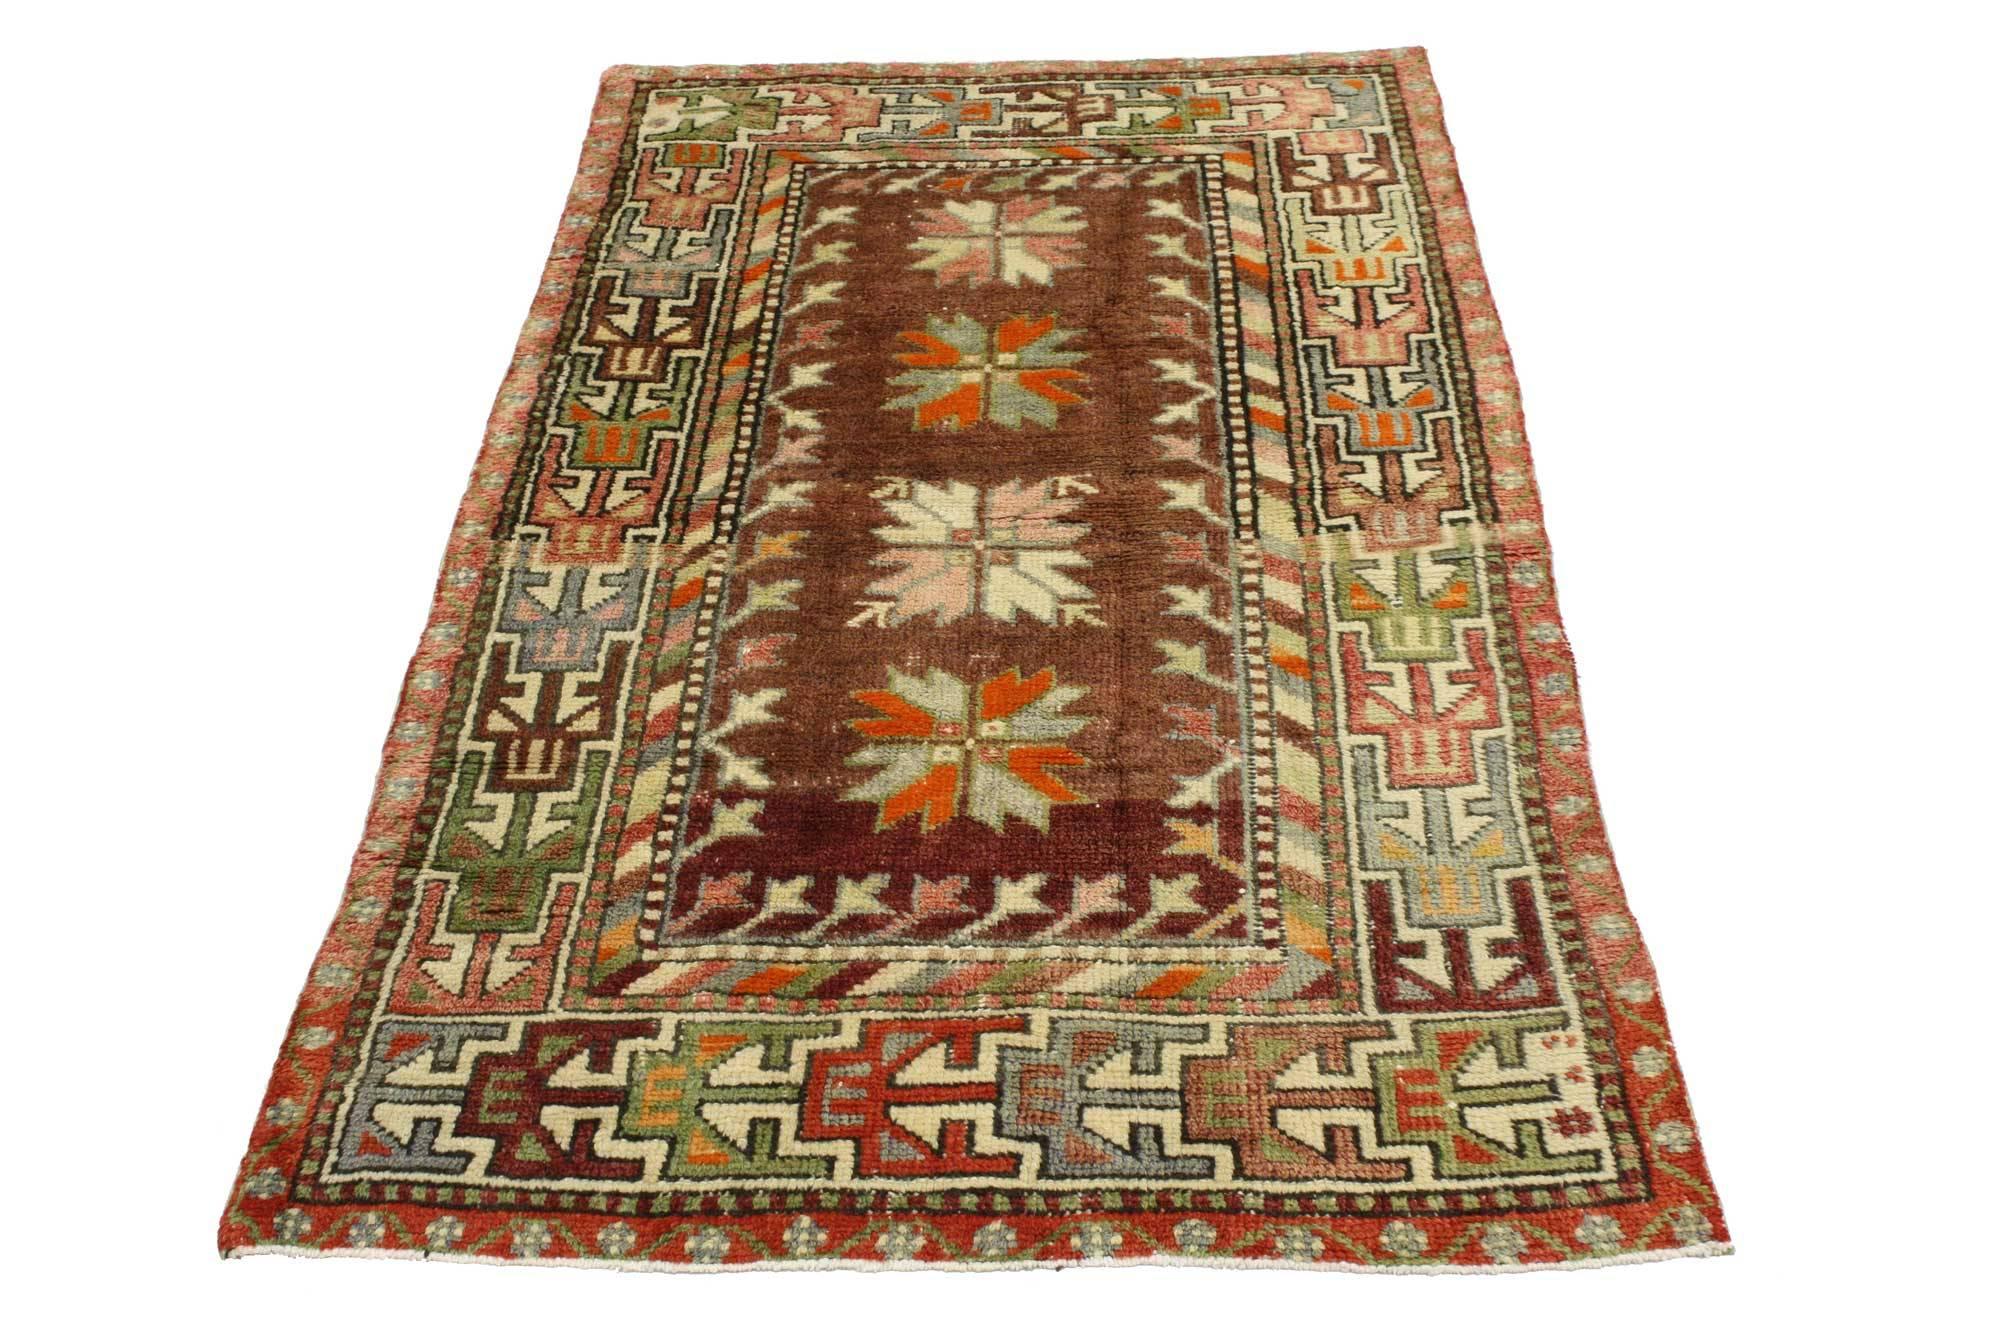 51688, Vintage Turkish Oushak Rug for Kitchen, Bathroom, Foyer or Entry Rug 02'09 x 05'03. This vintage Turkish Oushak rug features a modern traditional style. Immersed in Anatolian history and refined colors, this vintage Oushak rug combines